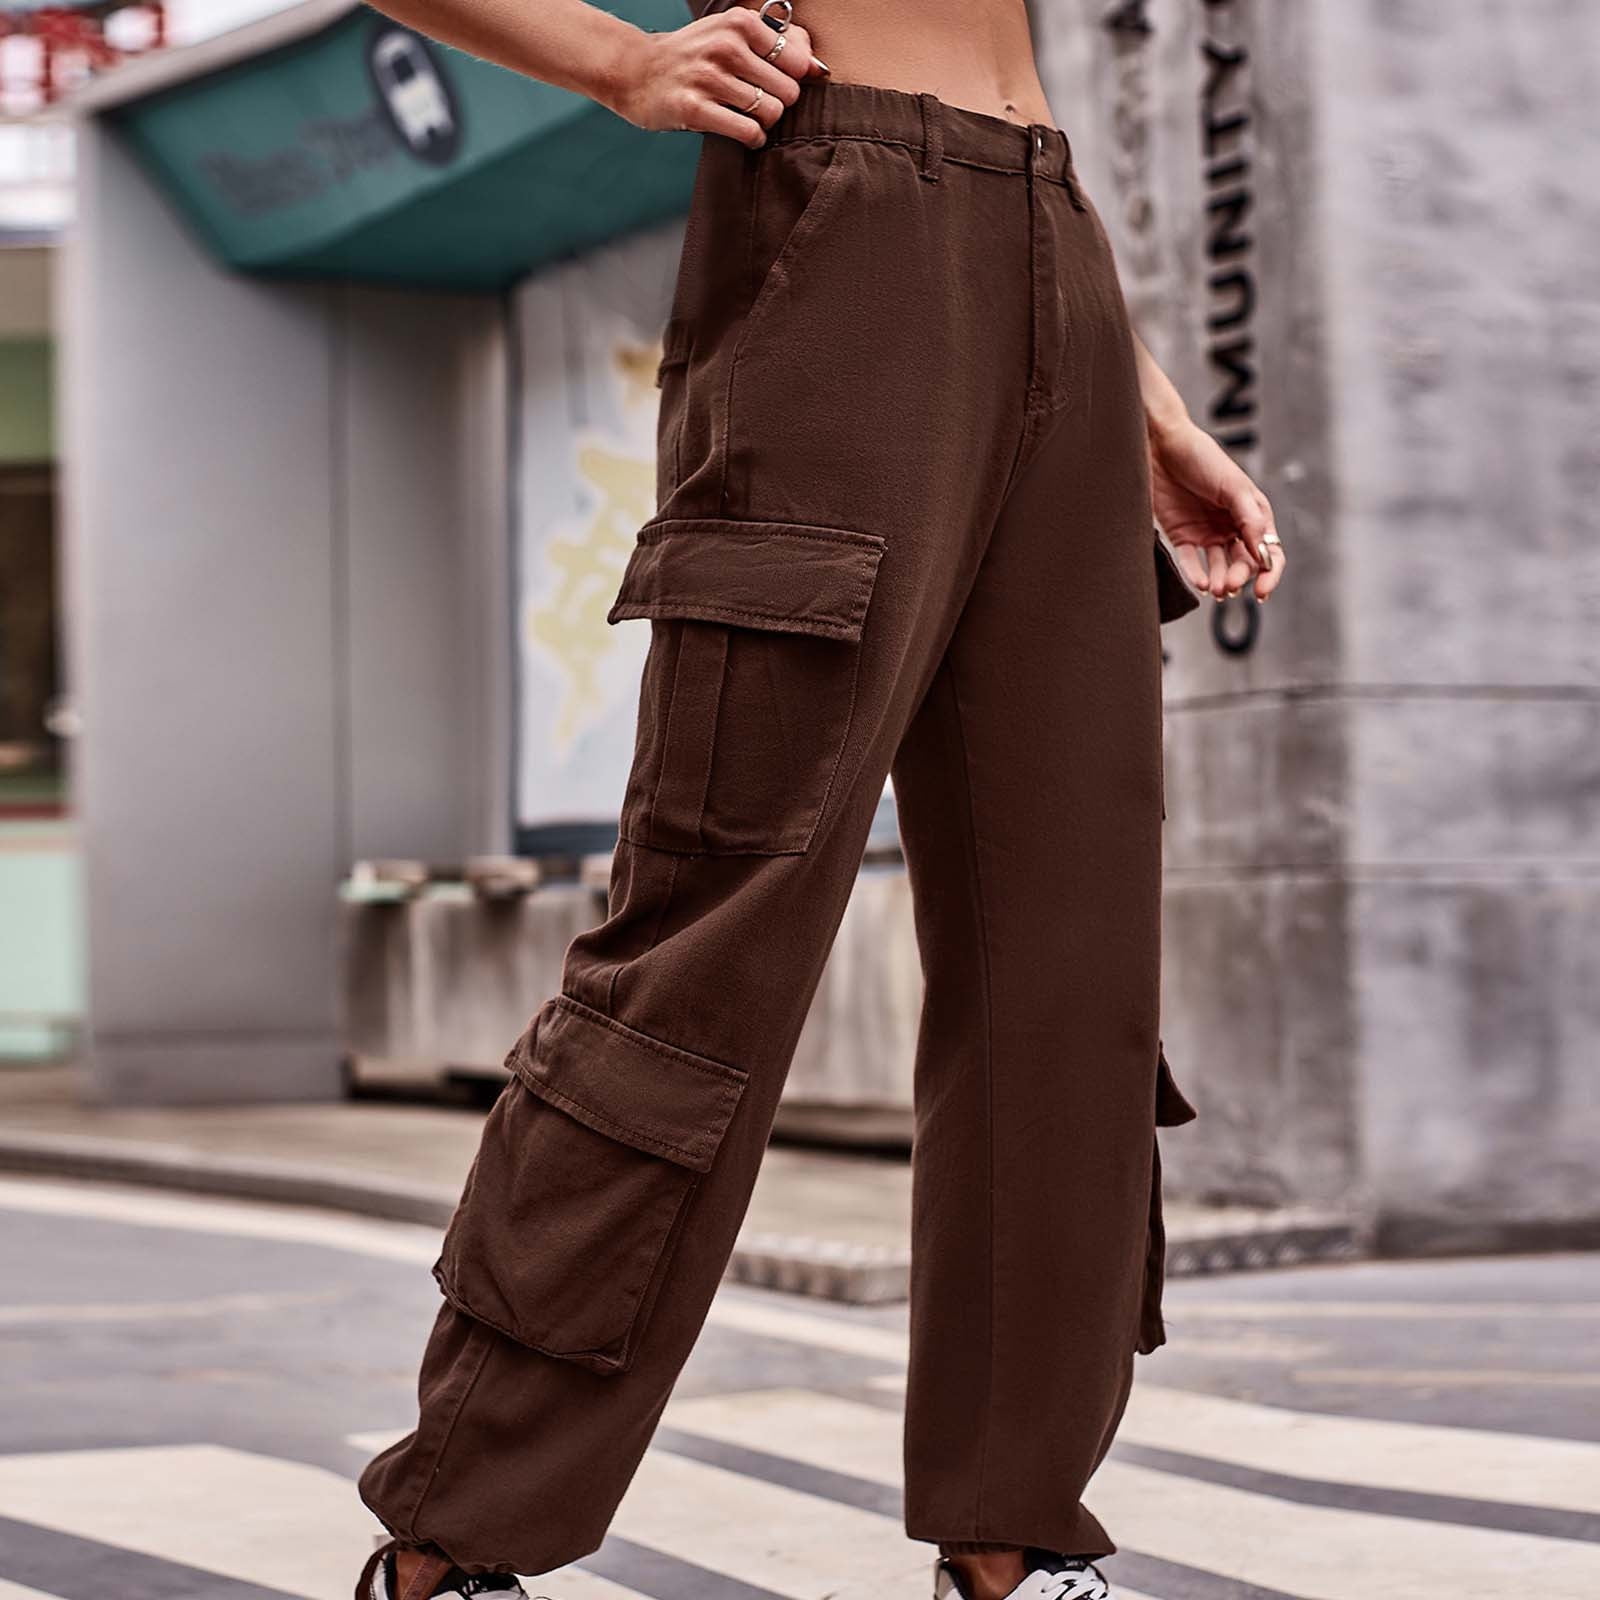 Cargo Pants Women High Waist Baggy Cargo Jeans Relaxed Fit Y2K Streetwear  Pants Casual Combat Military Trousers.